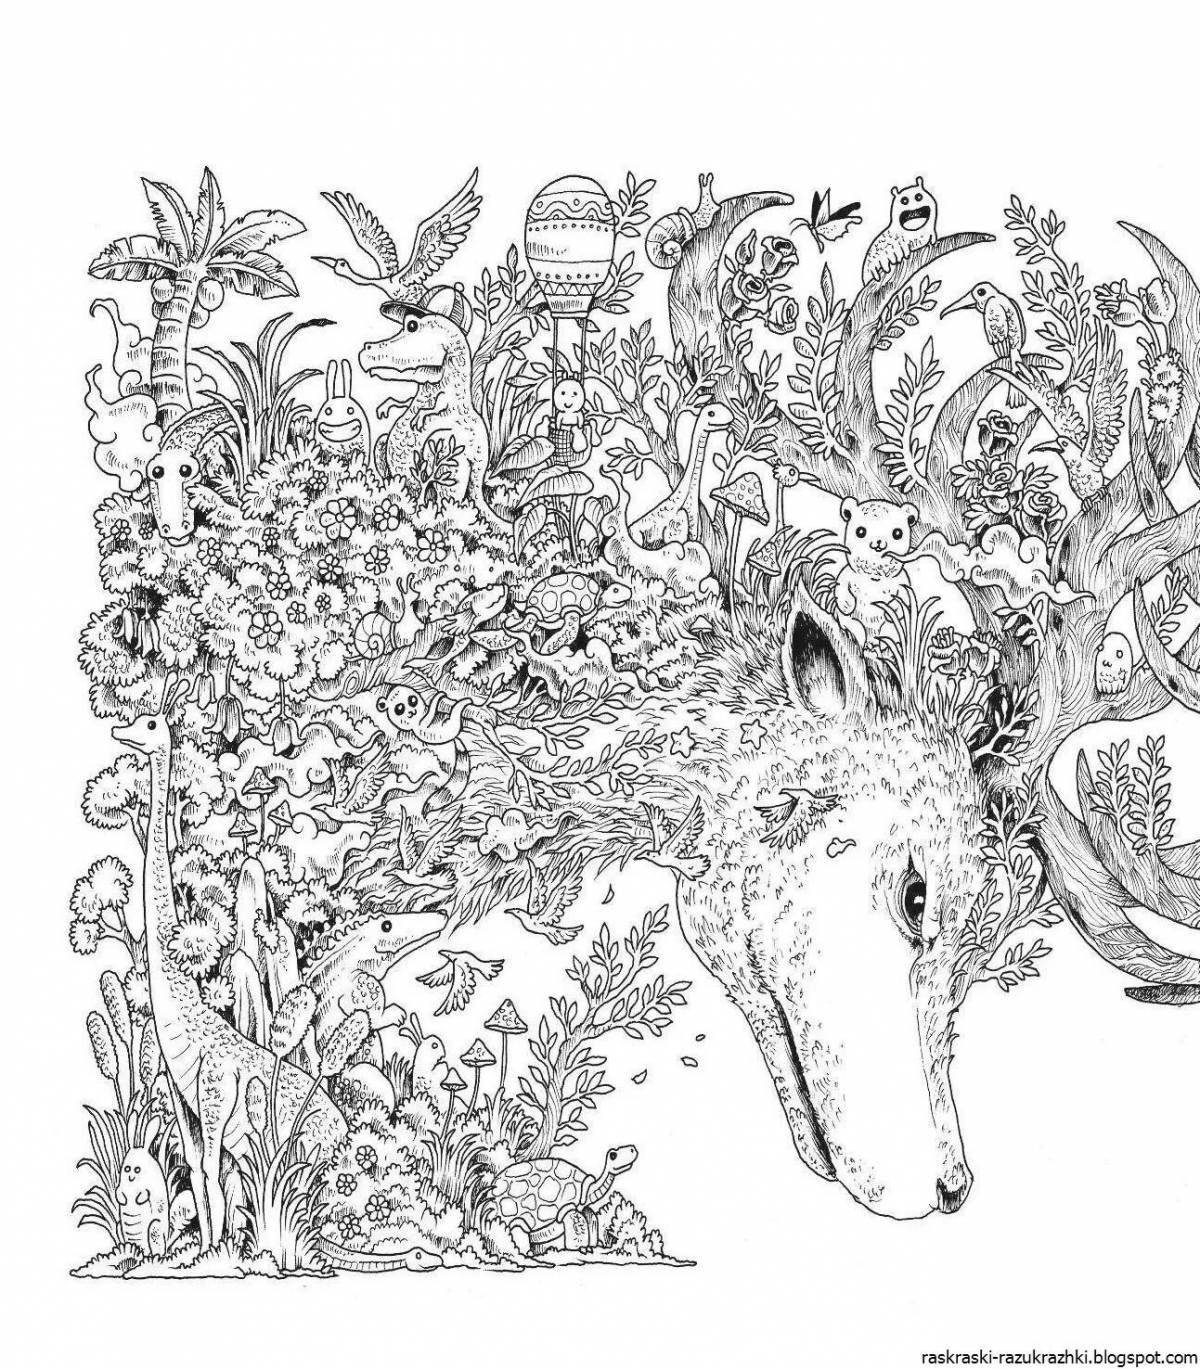 Great animal coloring pages for adults